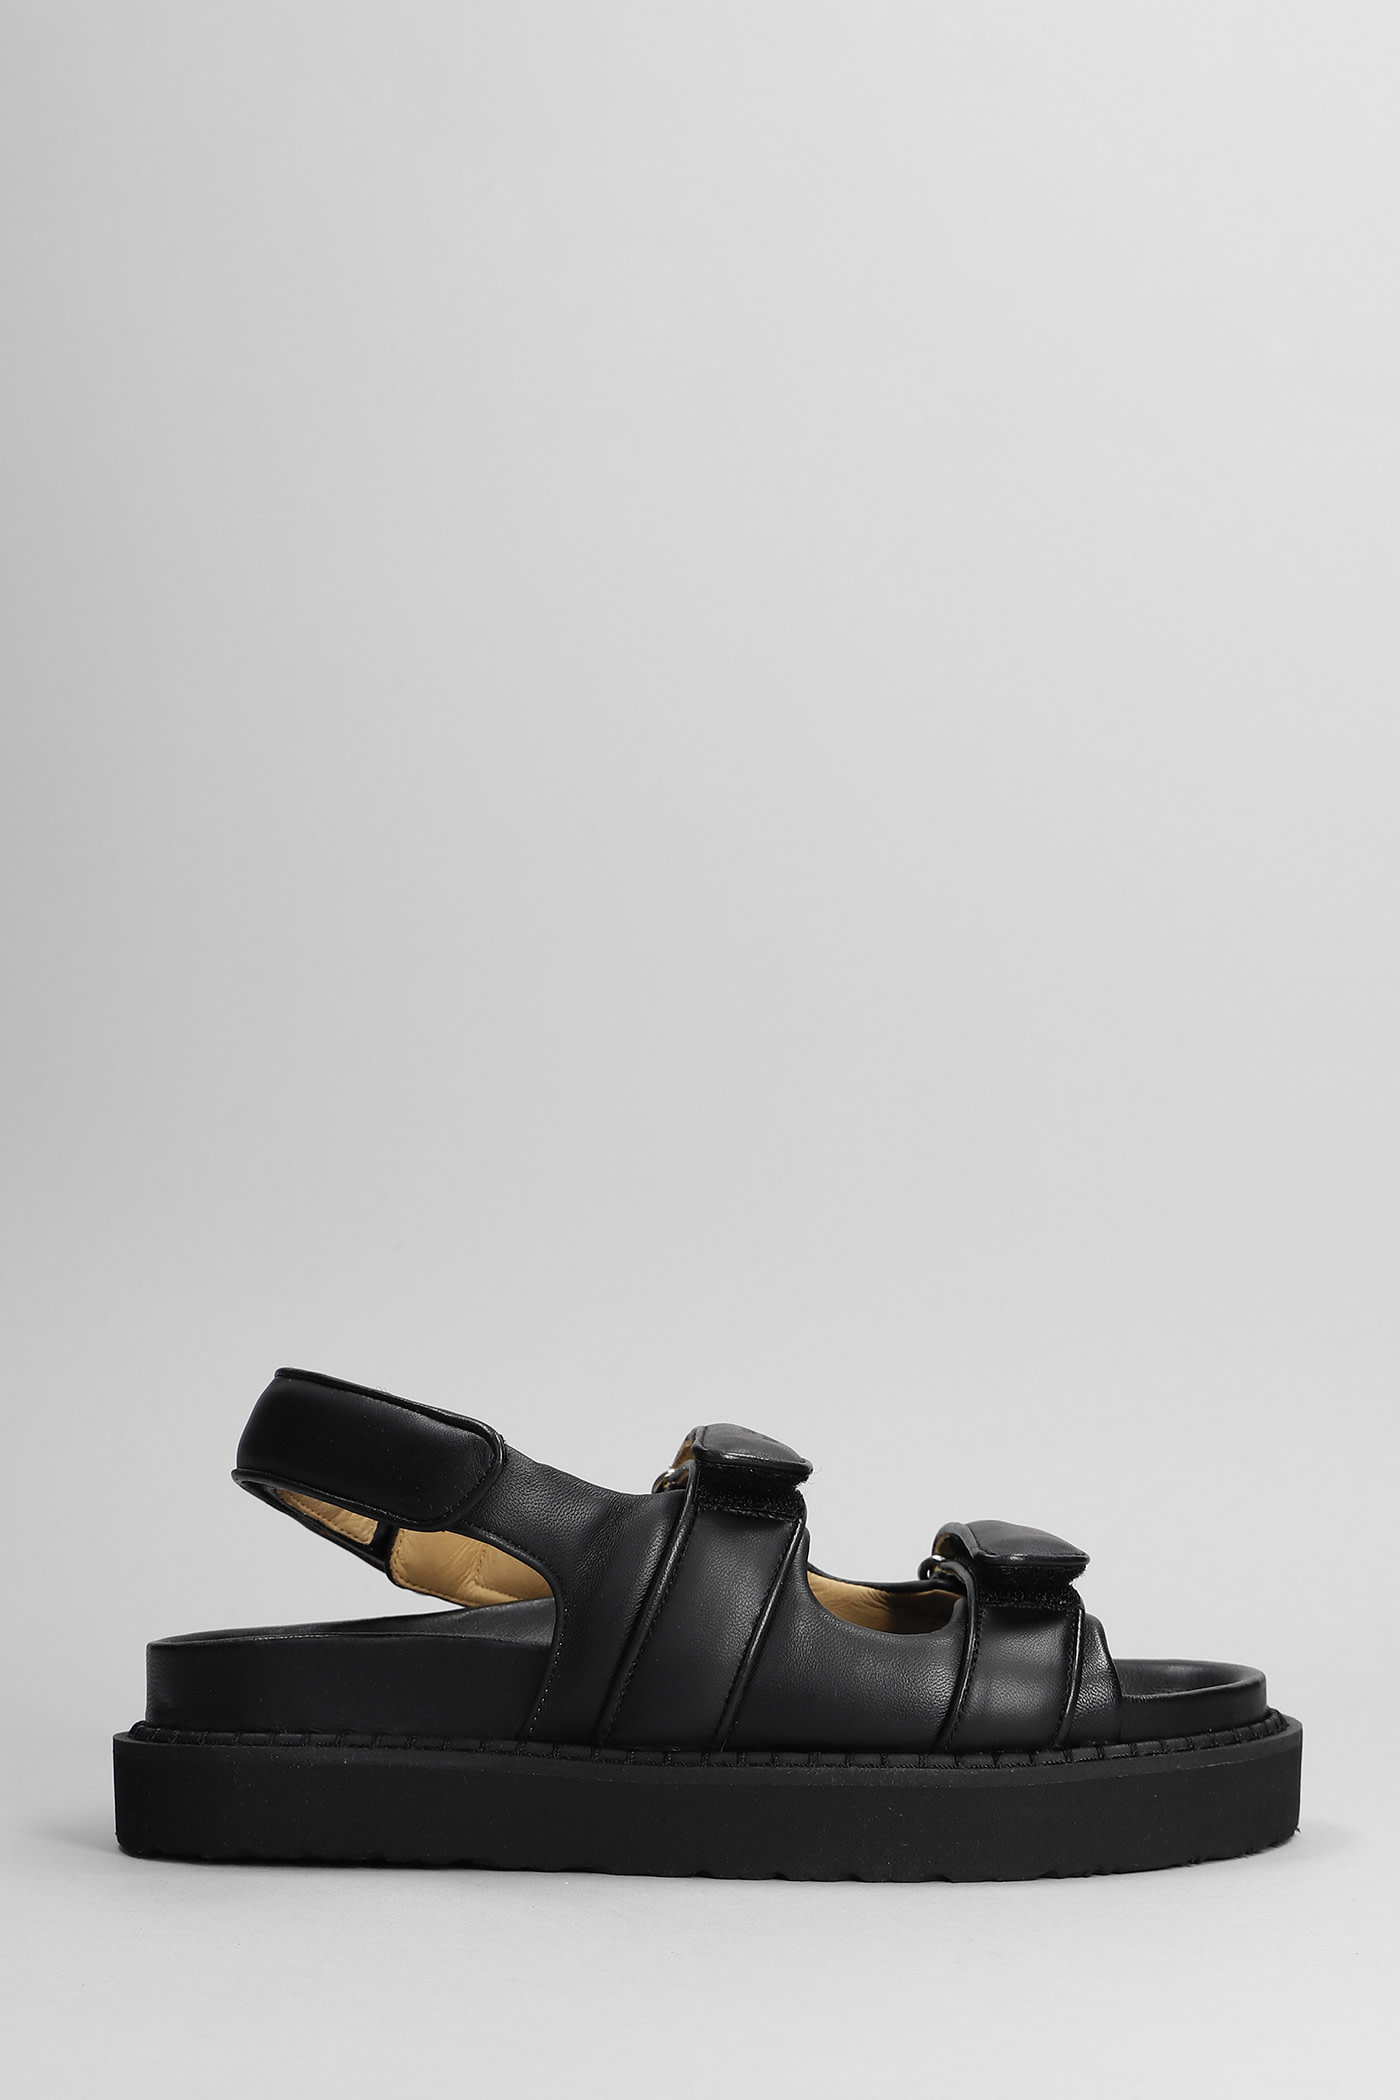 ISABEL MARANT MADEE FLATS IN BLACK LEATHER